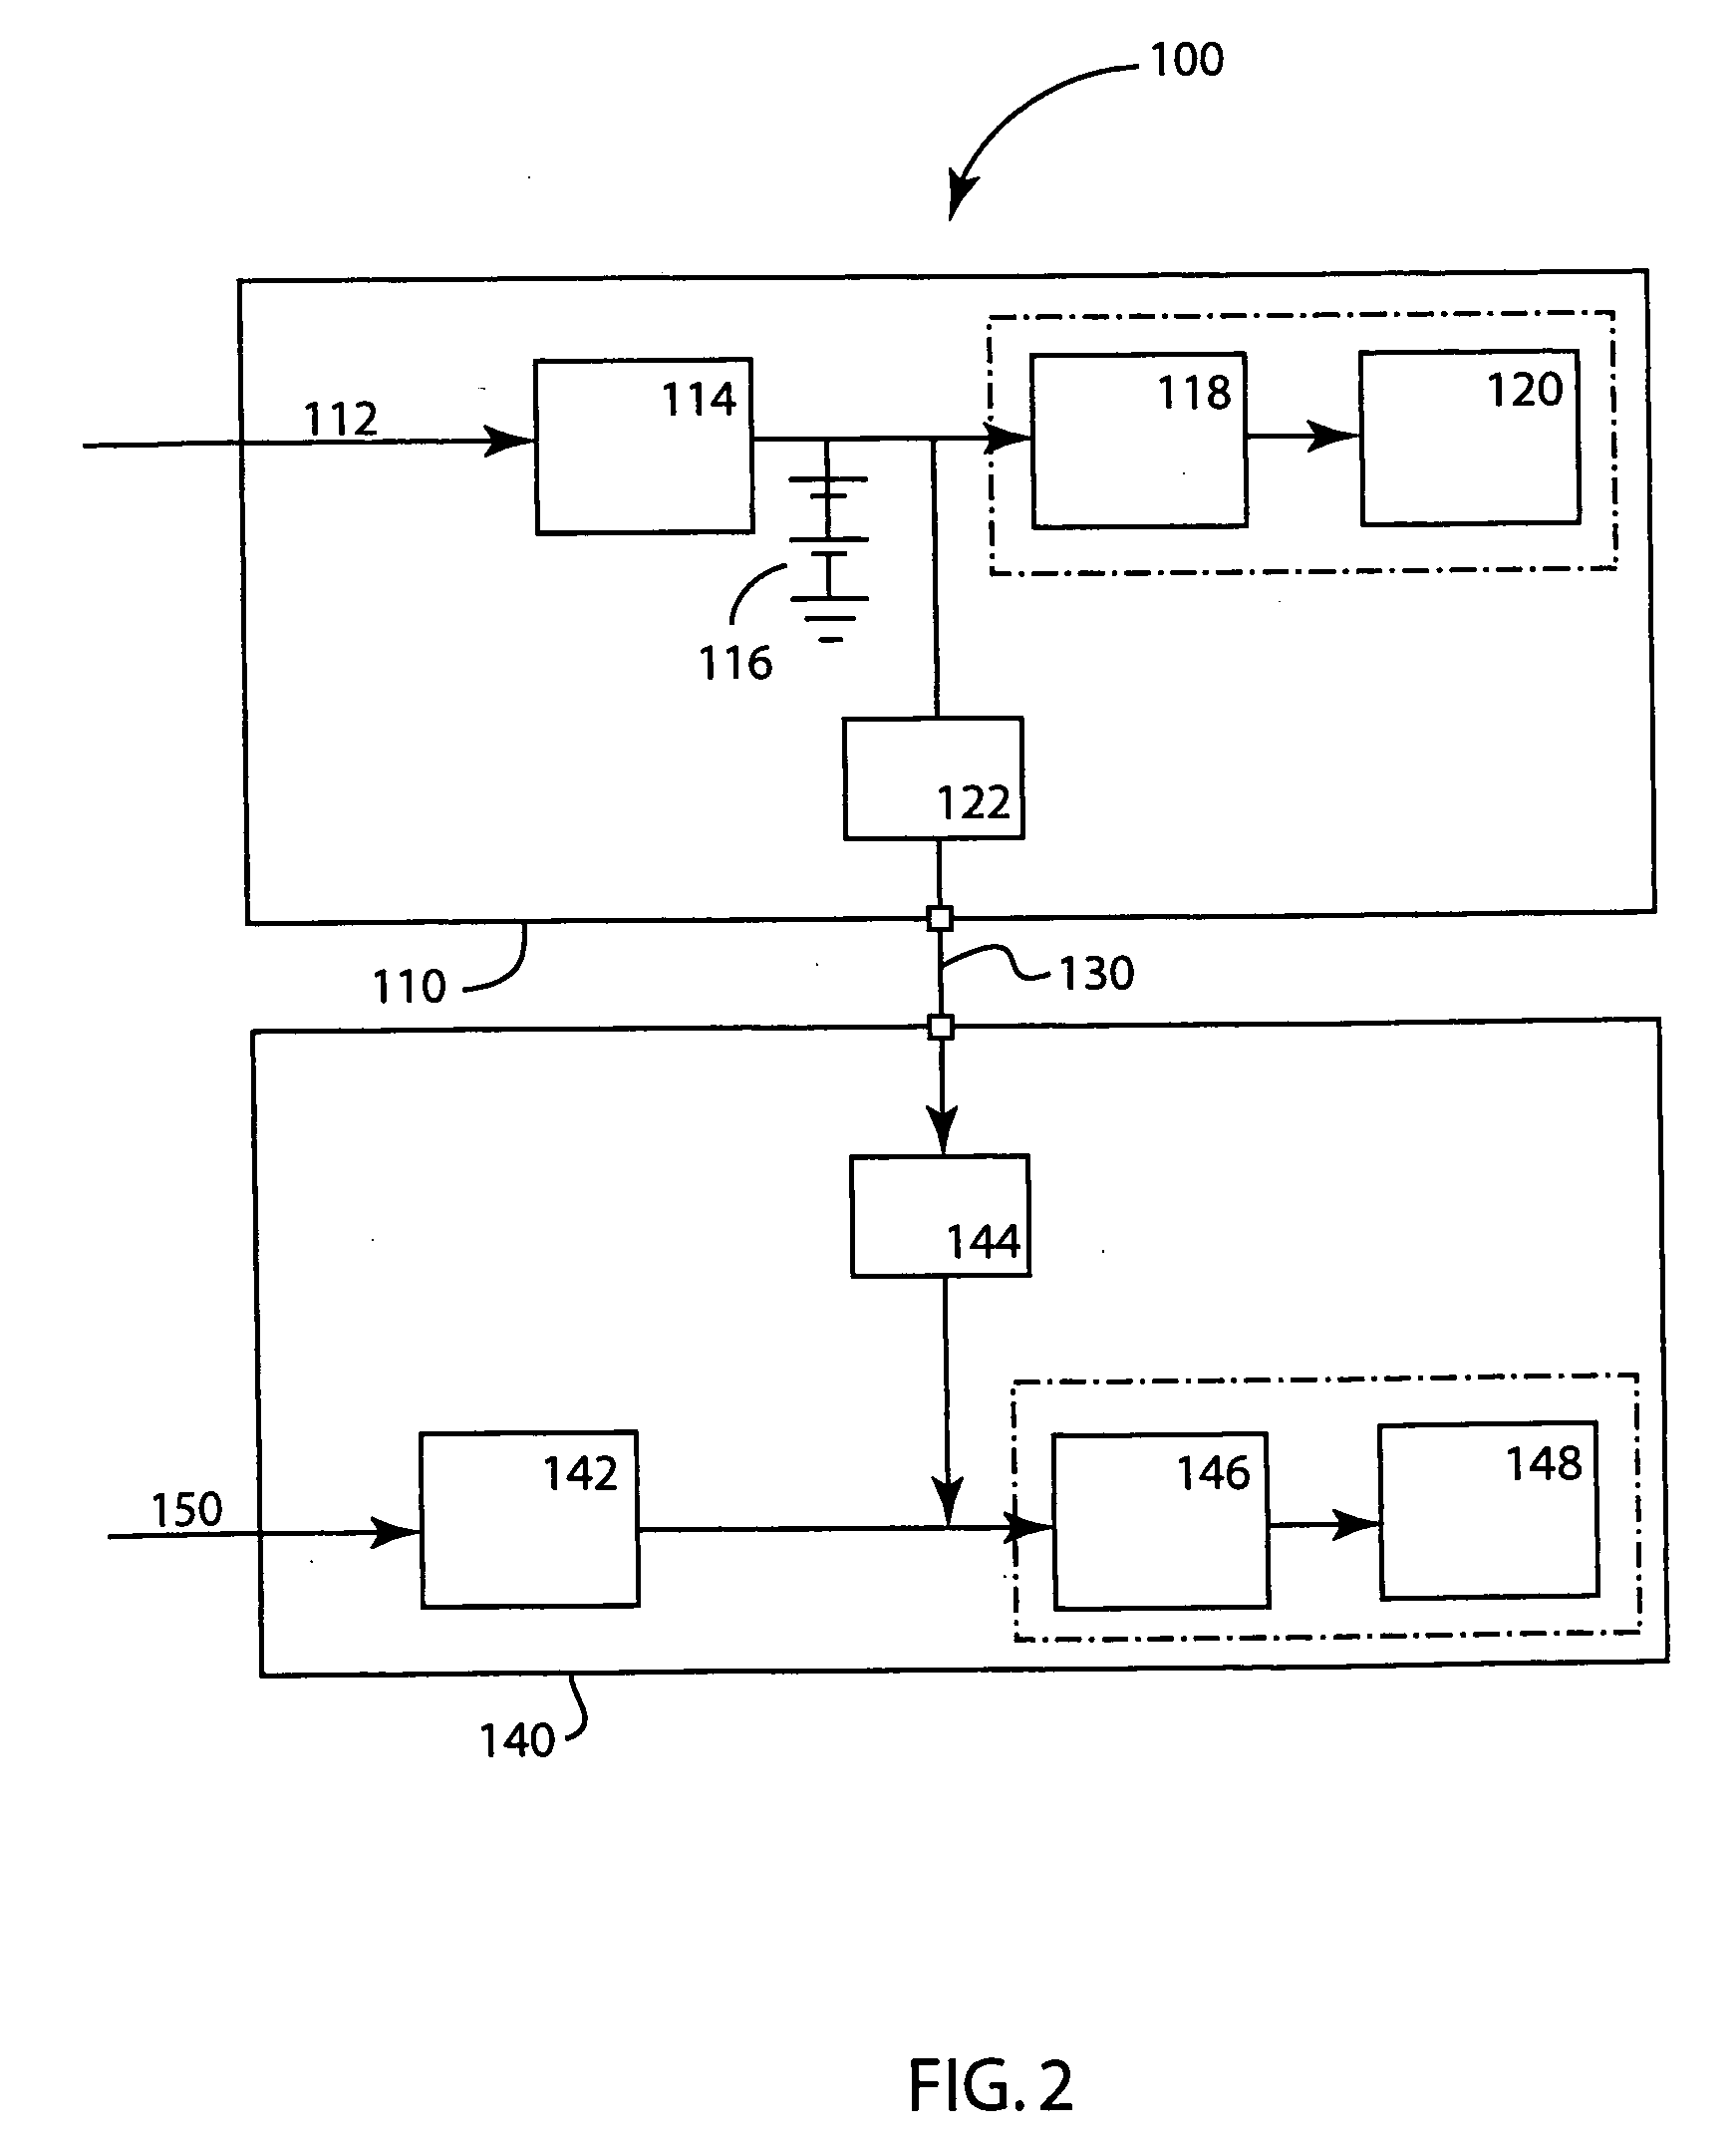 Method and system for providing auxiliary power for anesthesia delivery and patient monitoring